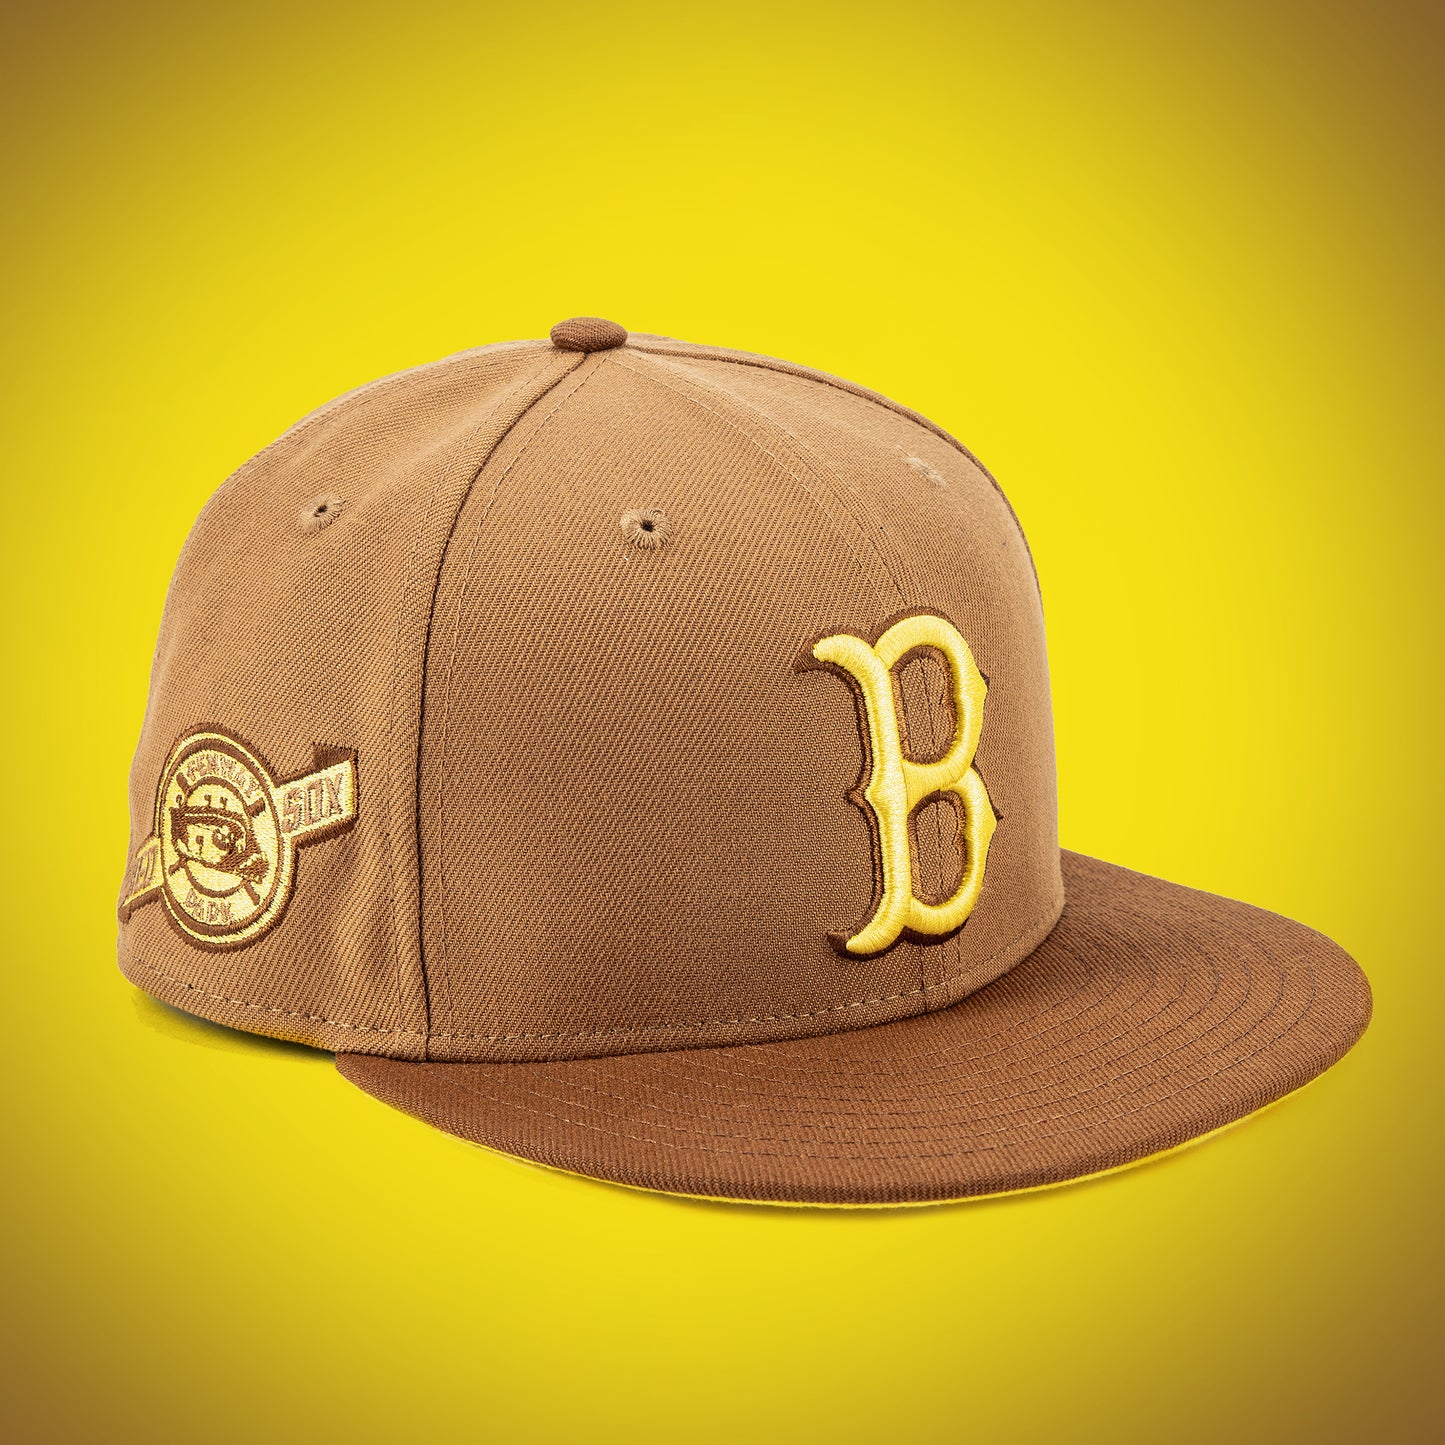 BOSTON RED SOX "LIGHT BRONZE/PEANUT" NEW ERA 59FIFTY FITTED HAT